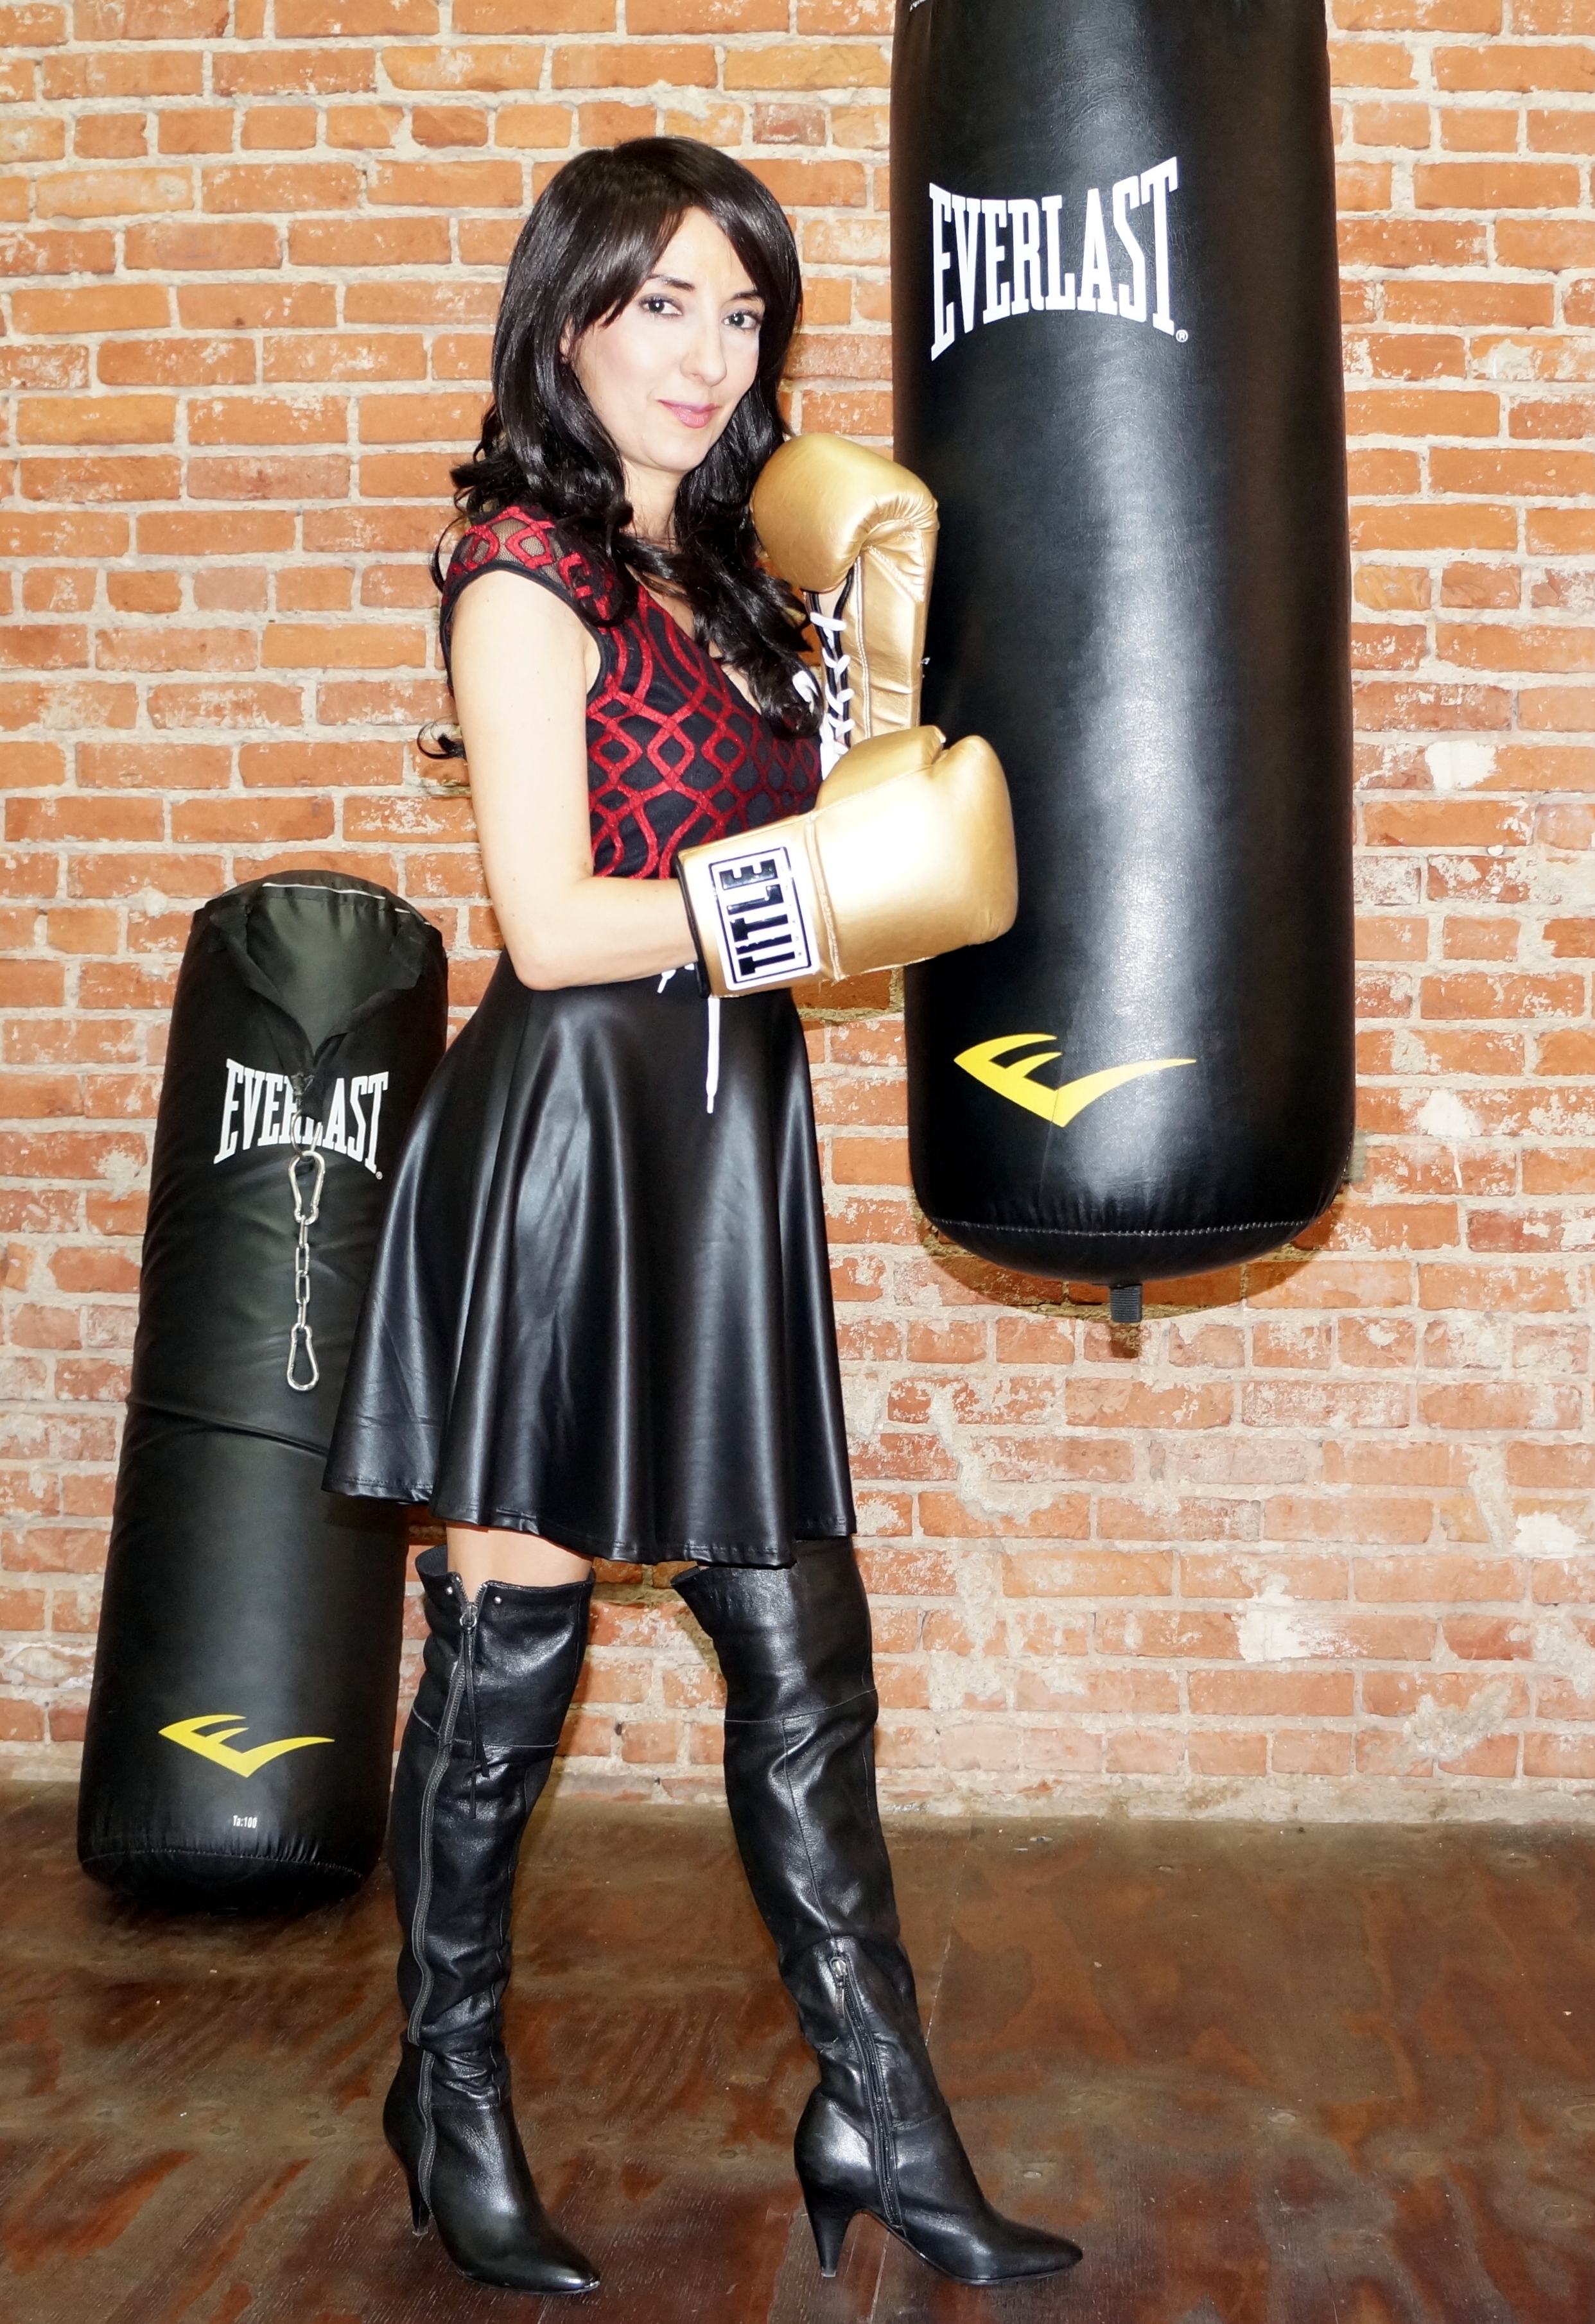 Luciana Lagana at Parkinson's disease event at the Stables in Santa Monica, CA on 12/7/14.